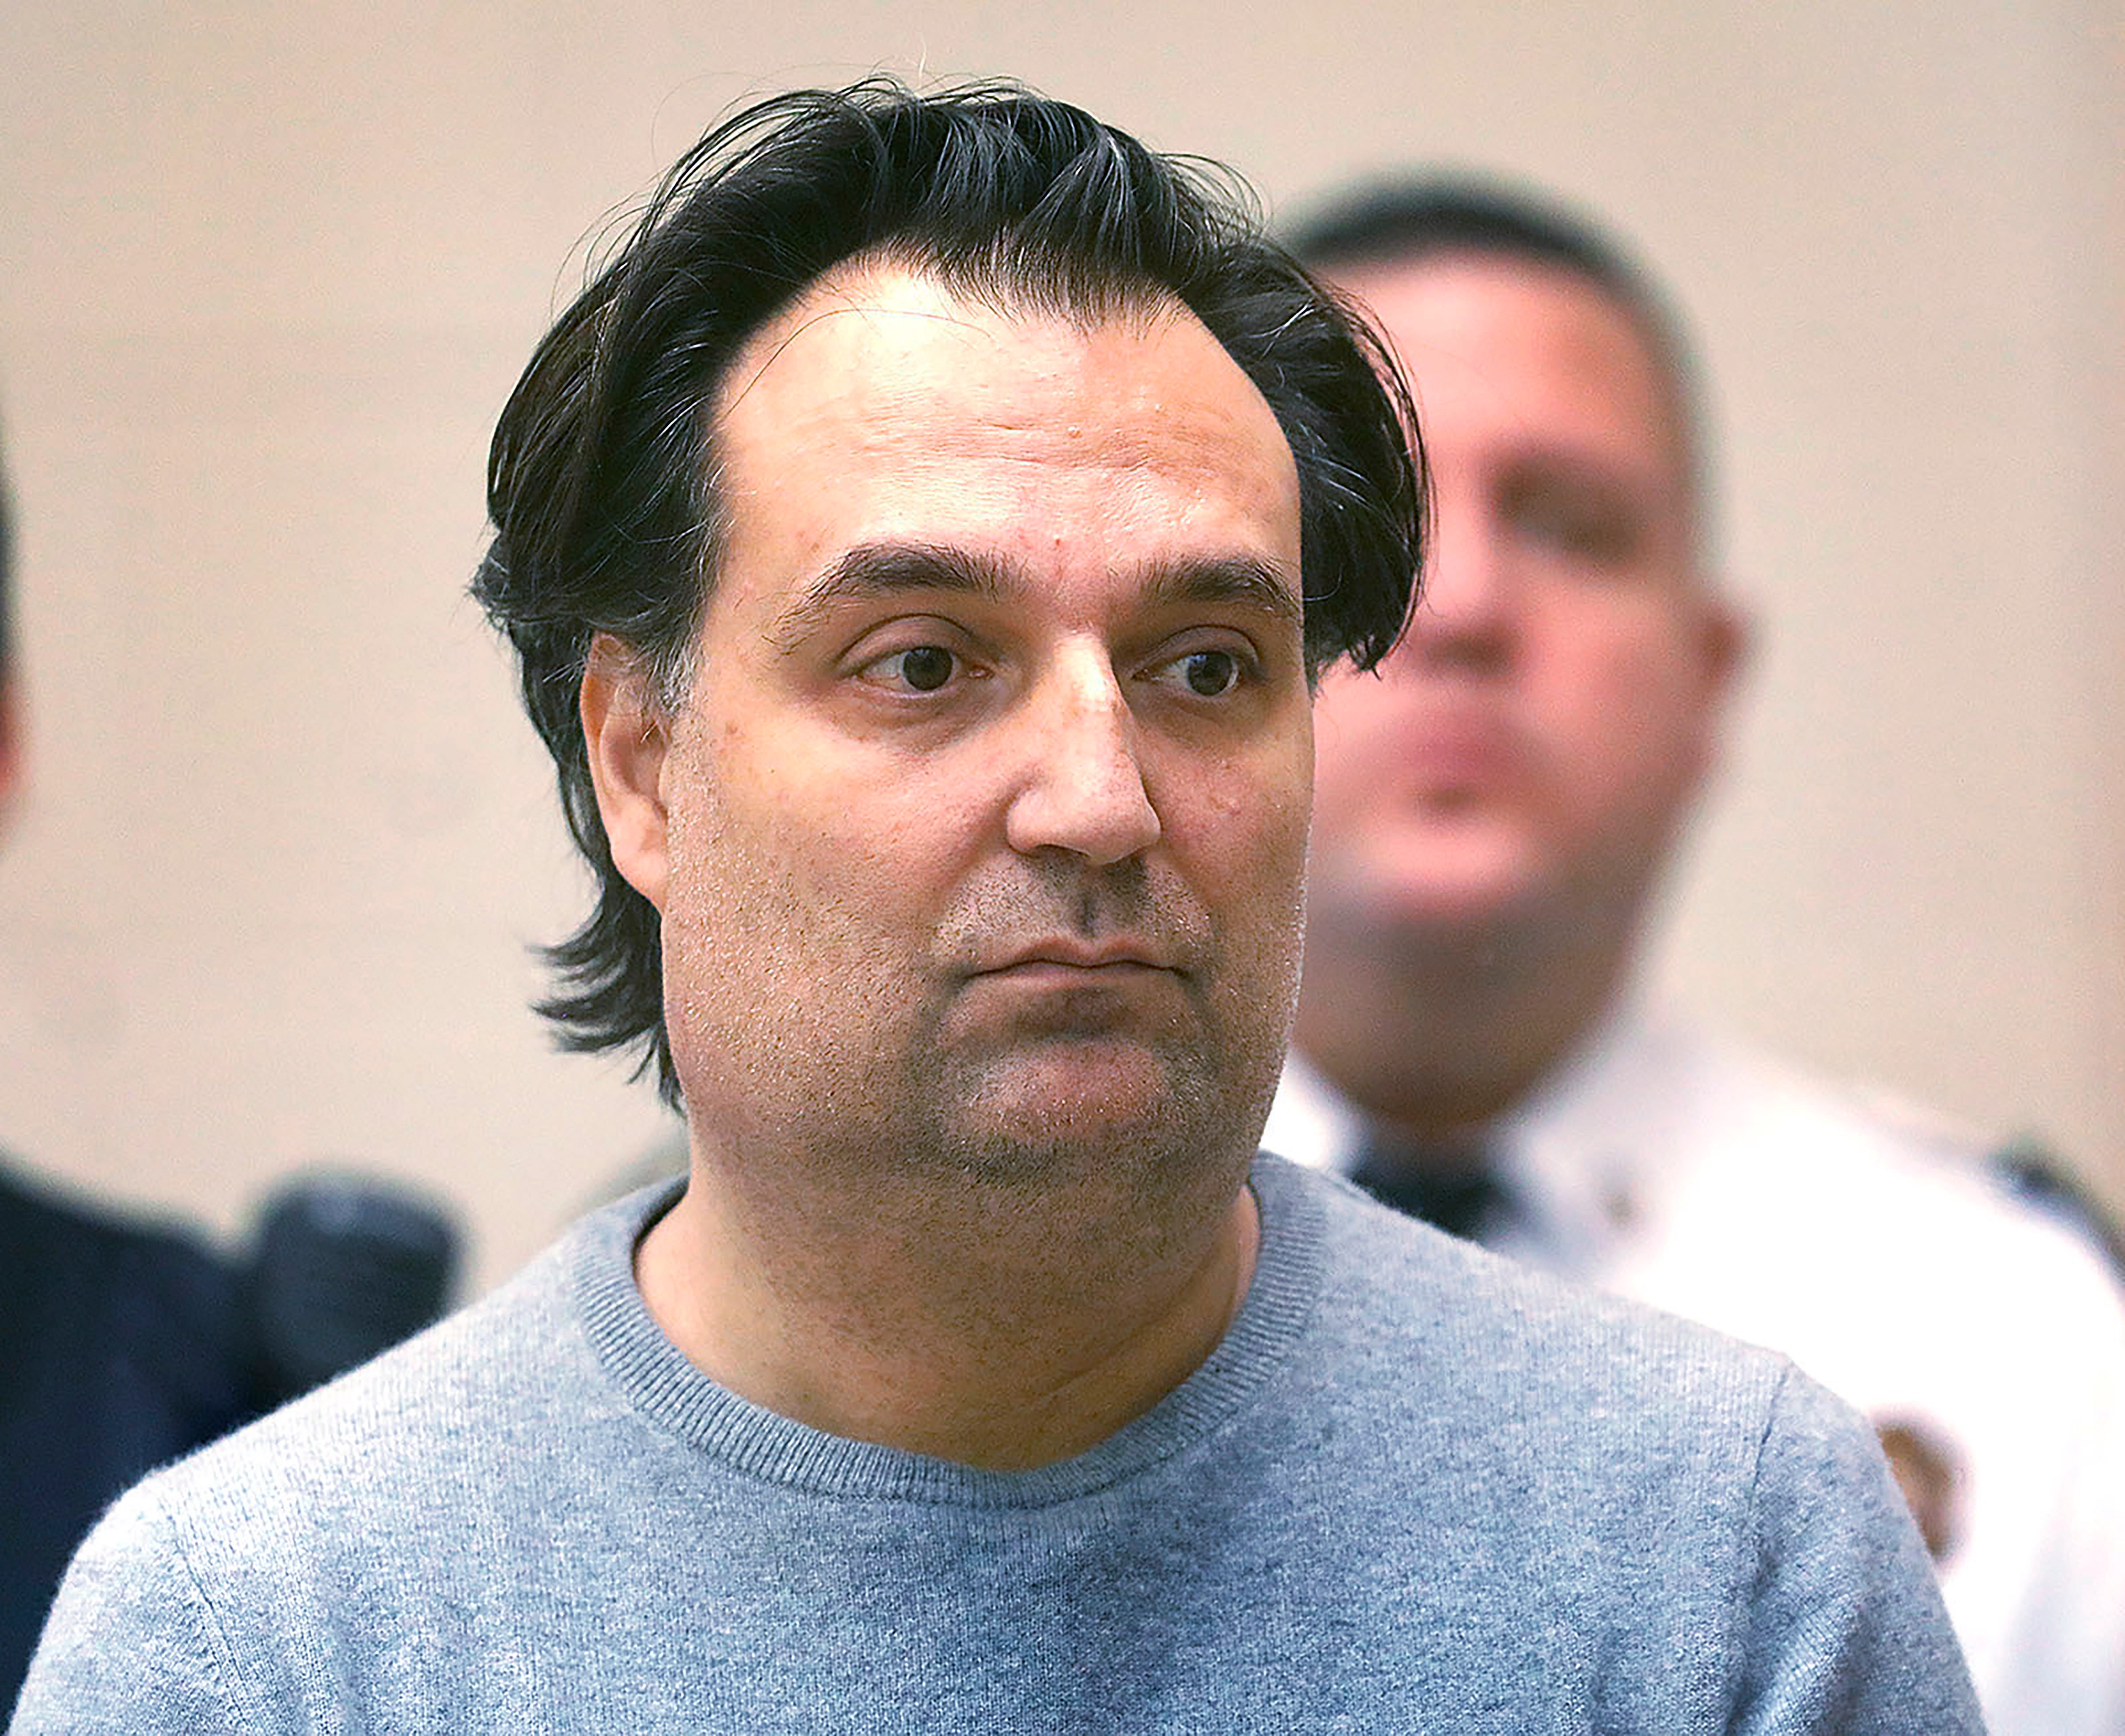 Brian Walshe, of Cohasset, faces a Quincy Court judge charged with impeding the investigation into his wife Ana' disappearance from their home Monday, Jan. 9, 2023